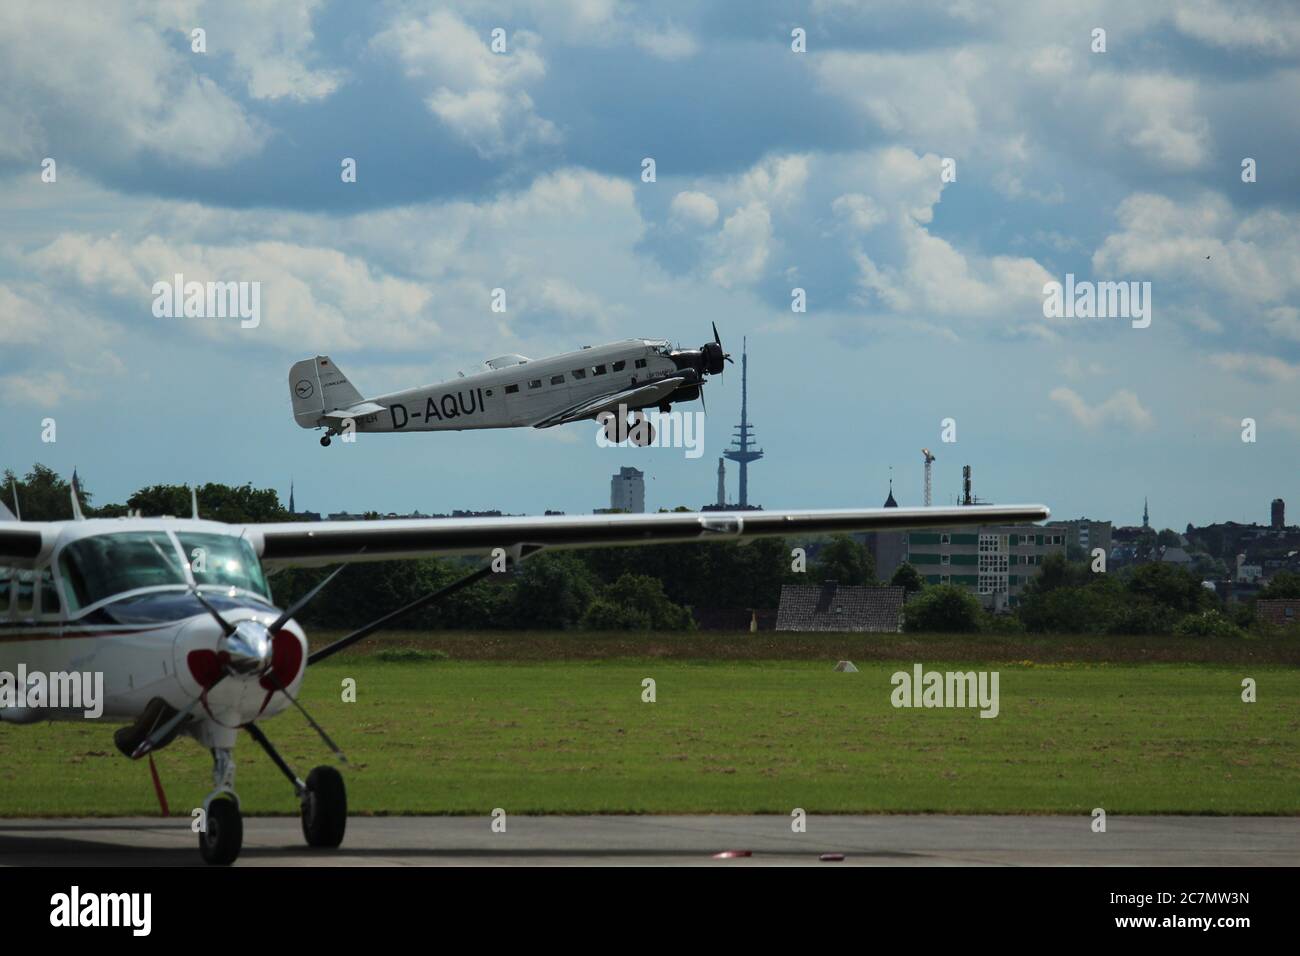 Historical Lufthansa Junkers Ju 52/3m (D-AQUI / D-CDLH) takes off at Kiel-Holtenau airport for a touristic flight over the city Stock Photo